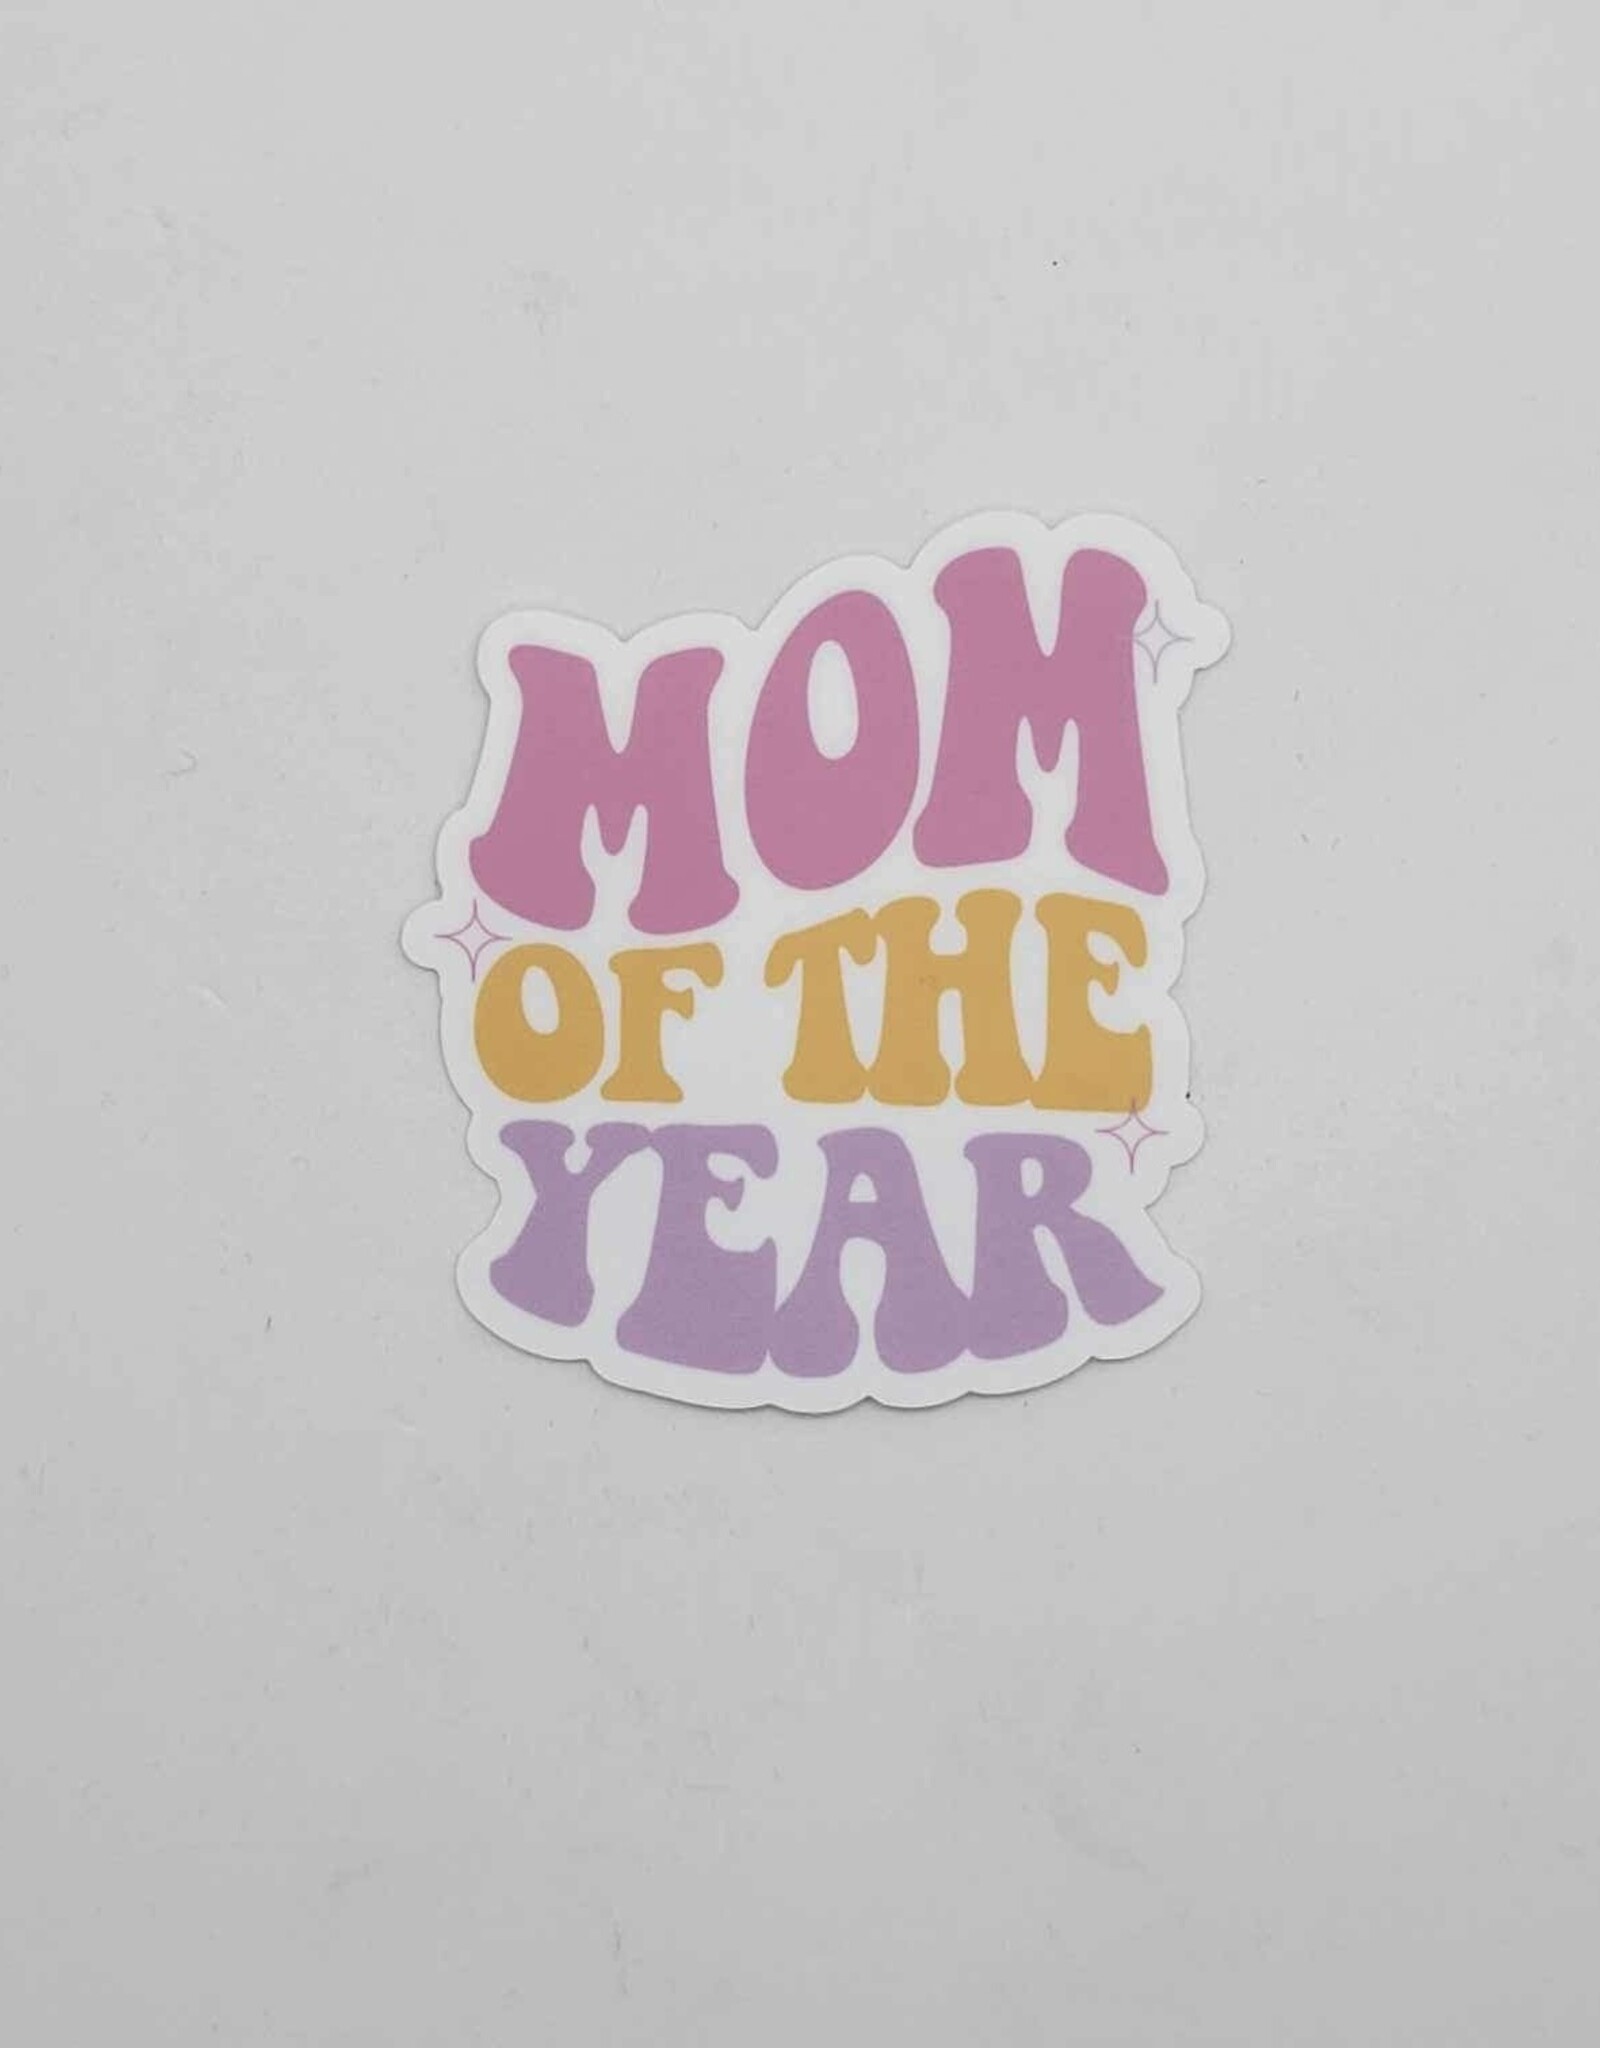 Big Moods Stickers Mom of the Year Sticker